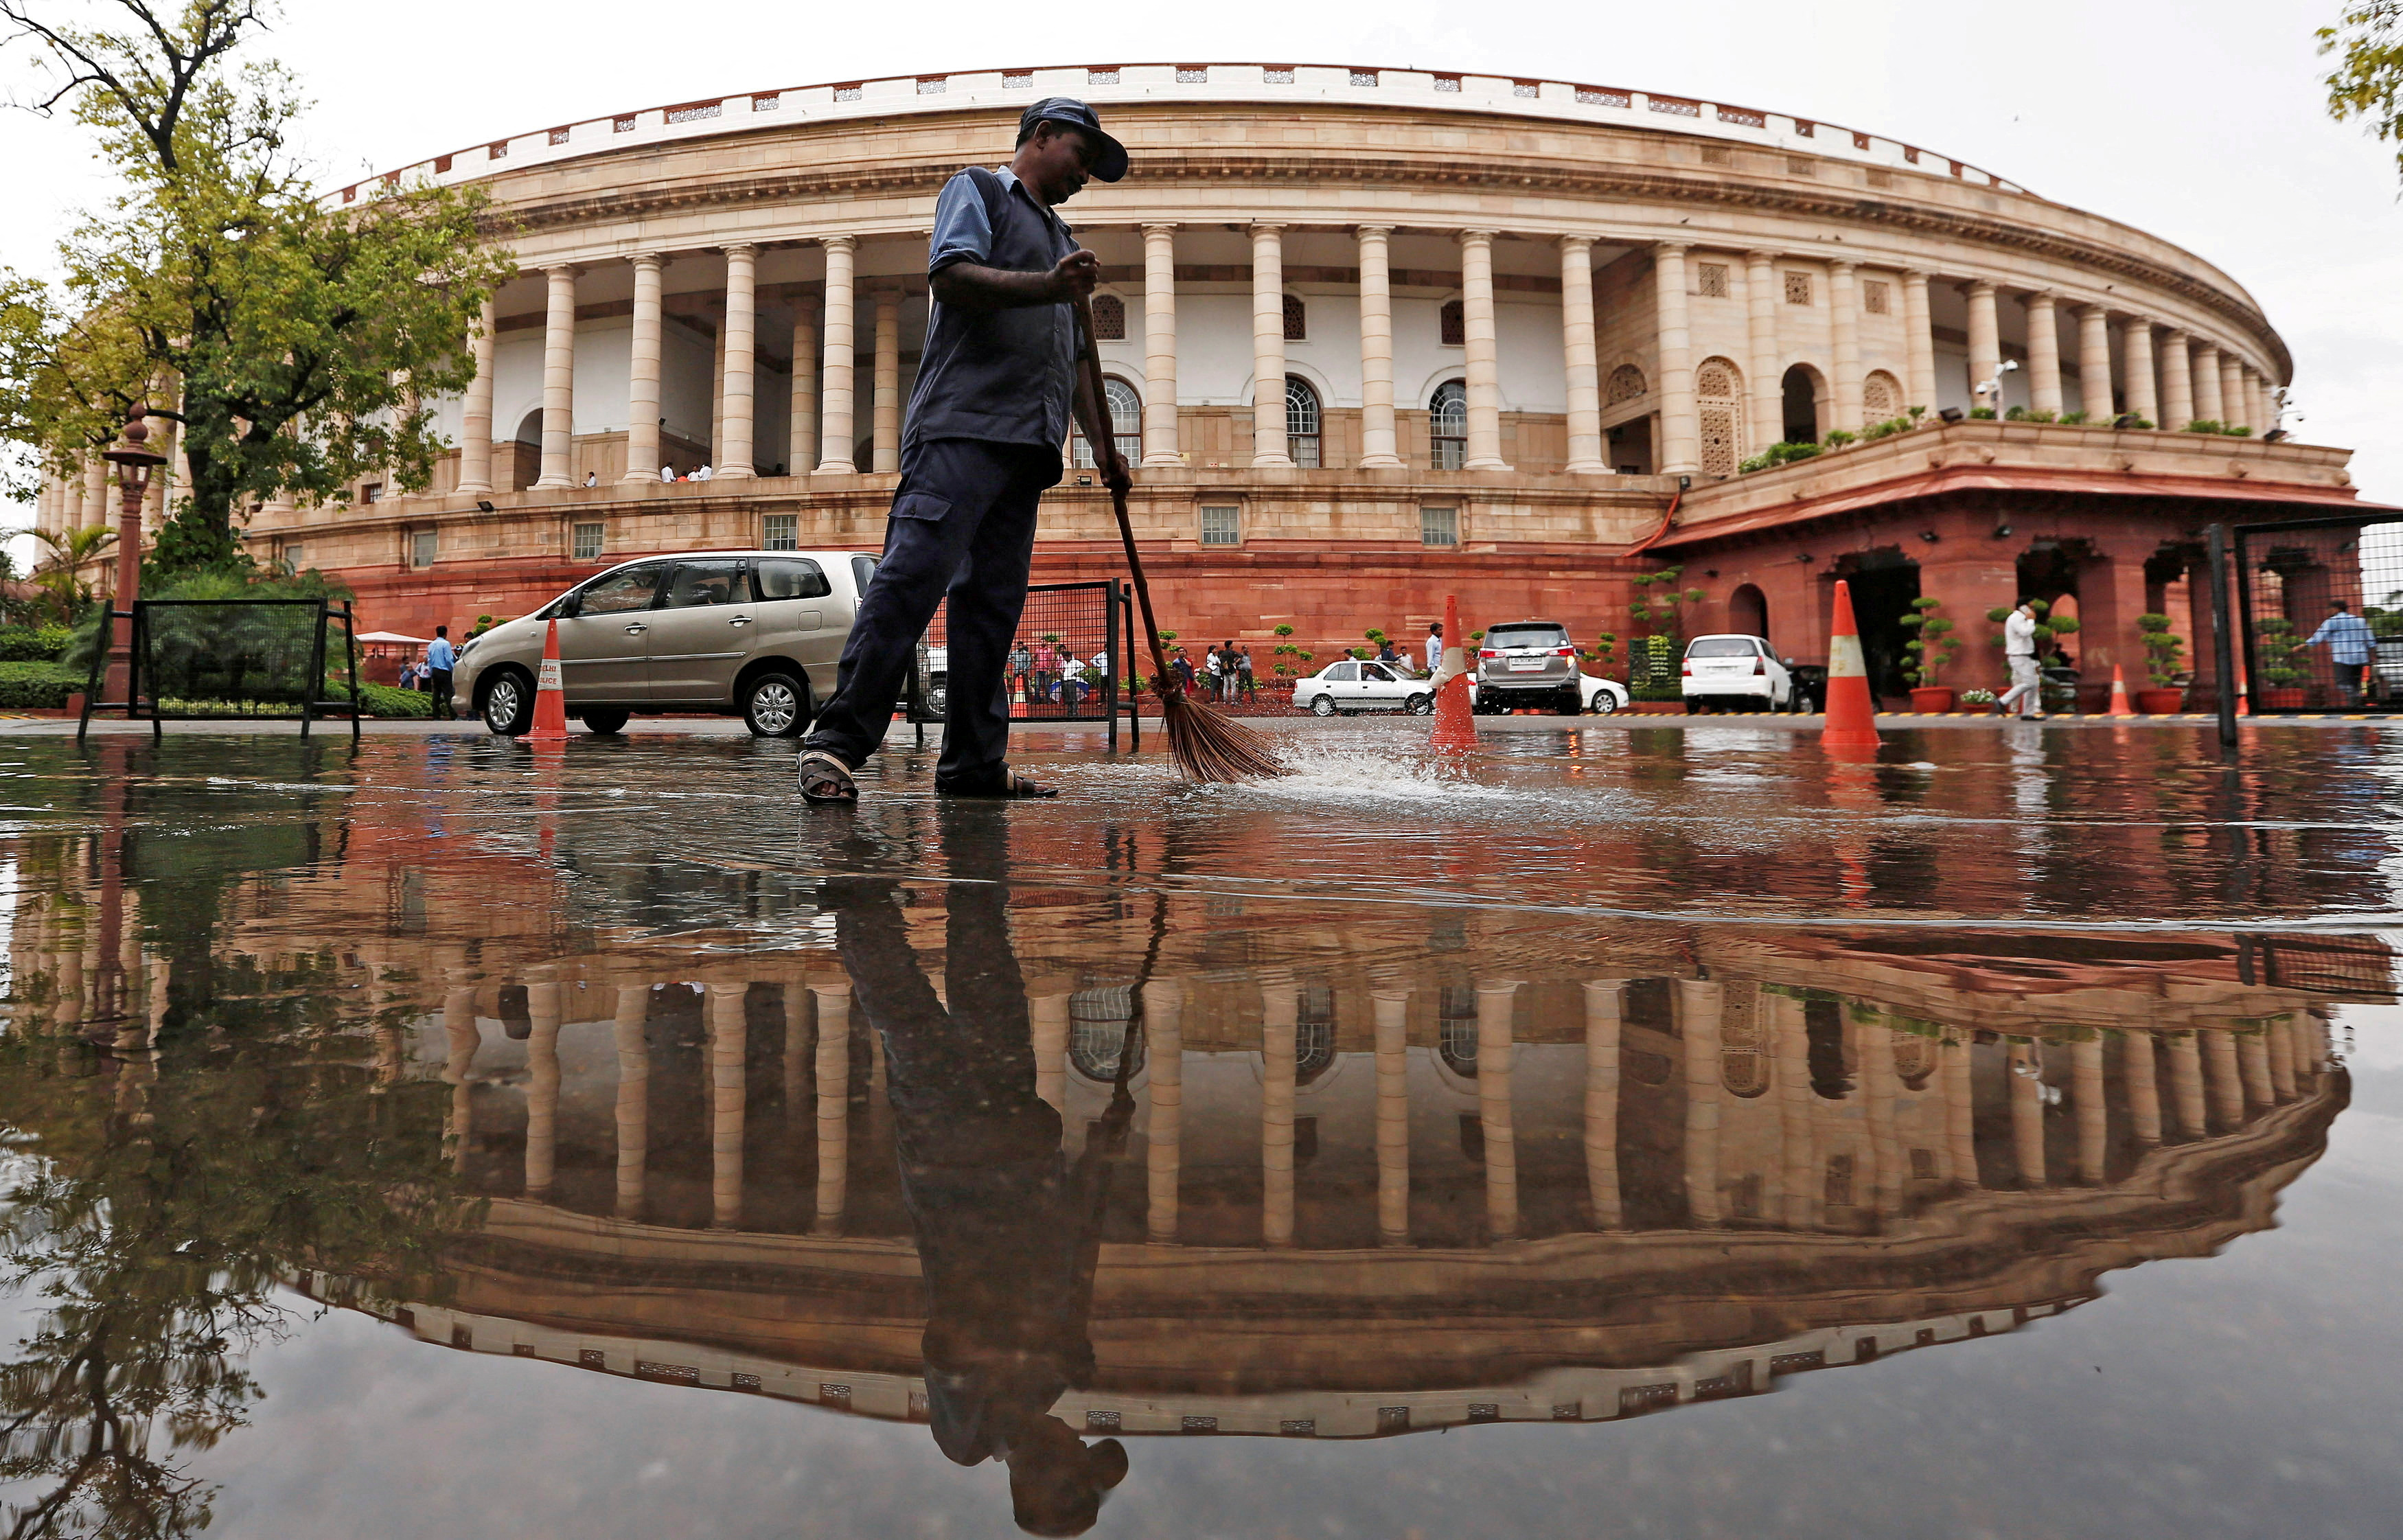 Indian parliament building is reflected in a puddle after the rain as a man sweeps the water in New Delhi